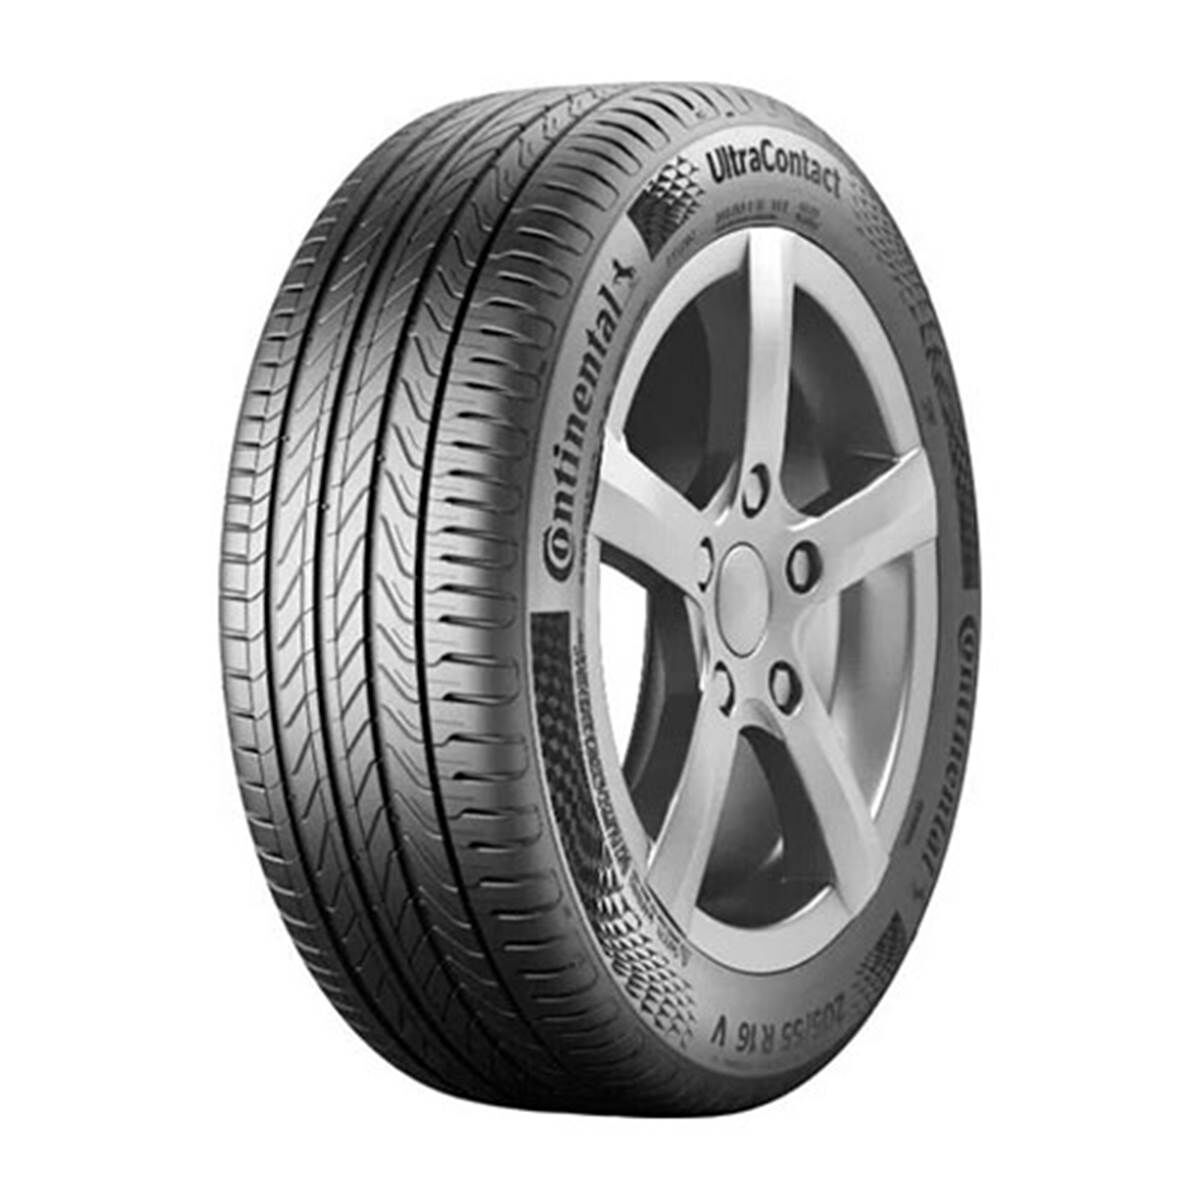 Continental Neumático  Ultracontact 195/65R15 91T